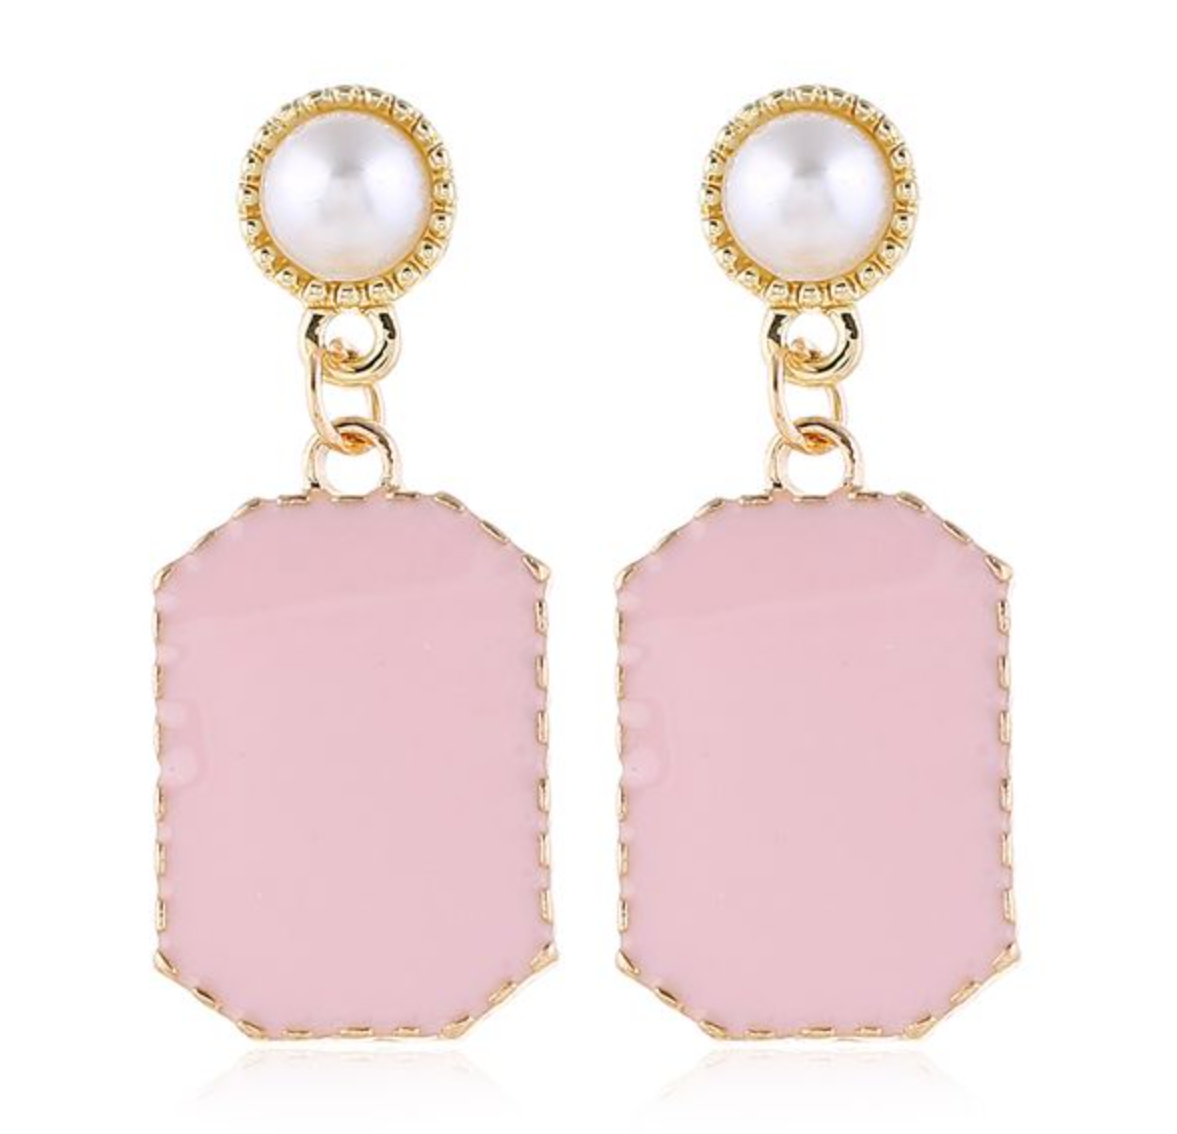 Pastel Passion Earring - Pink